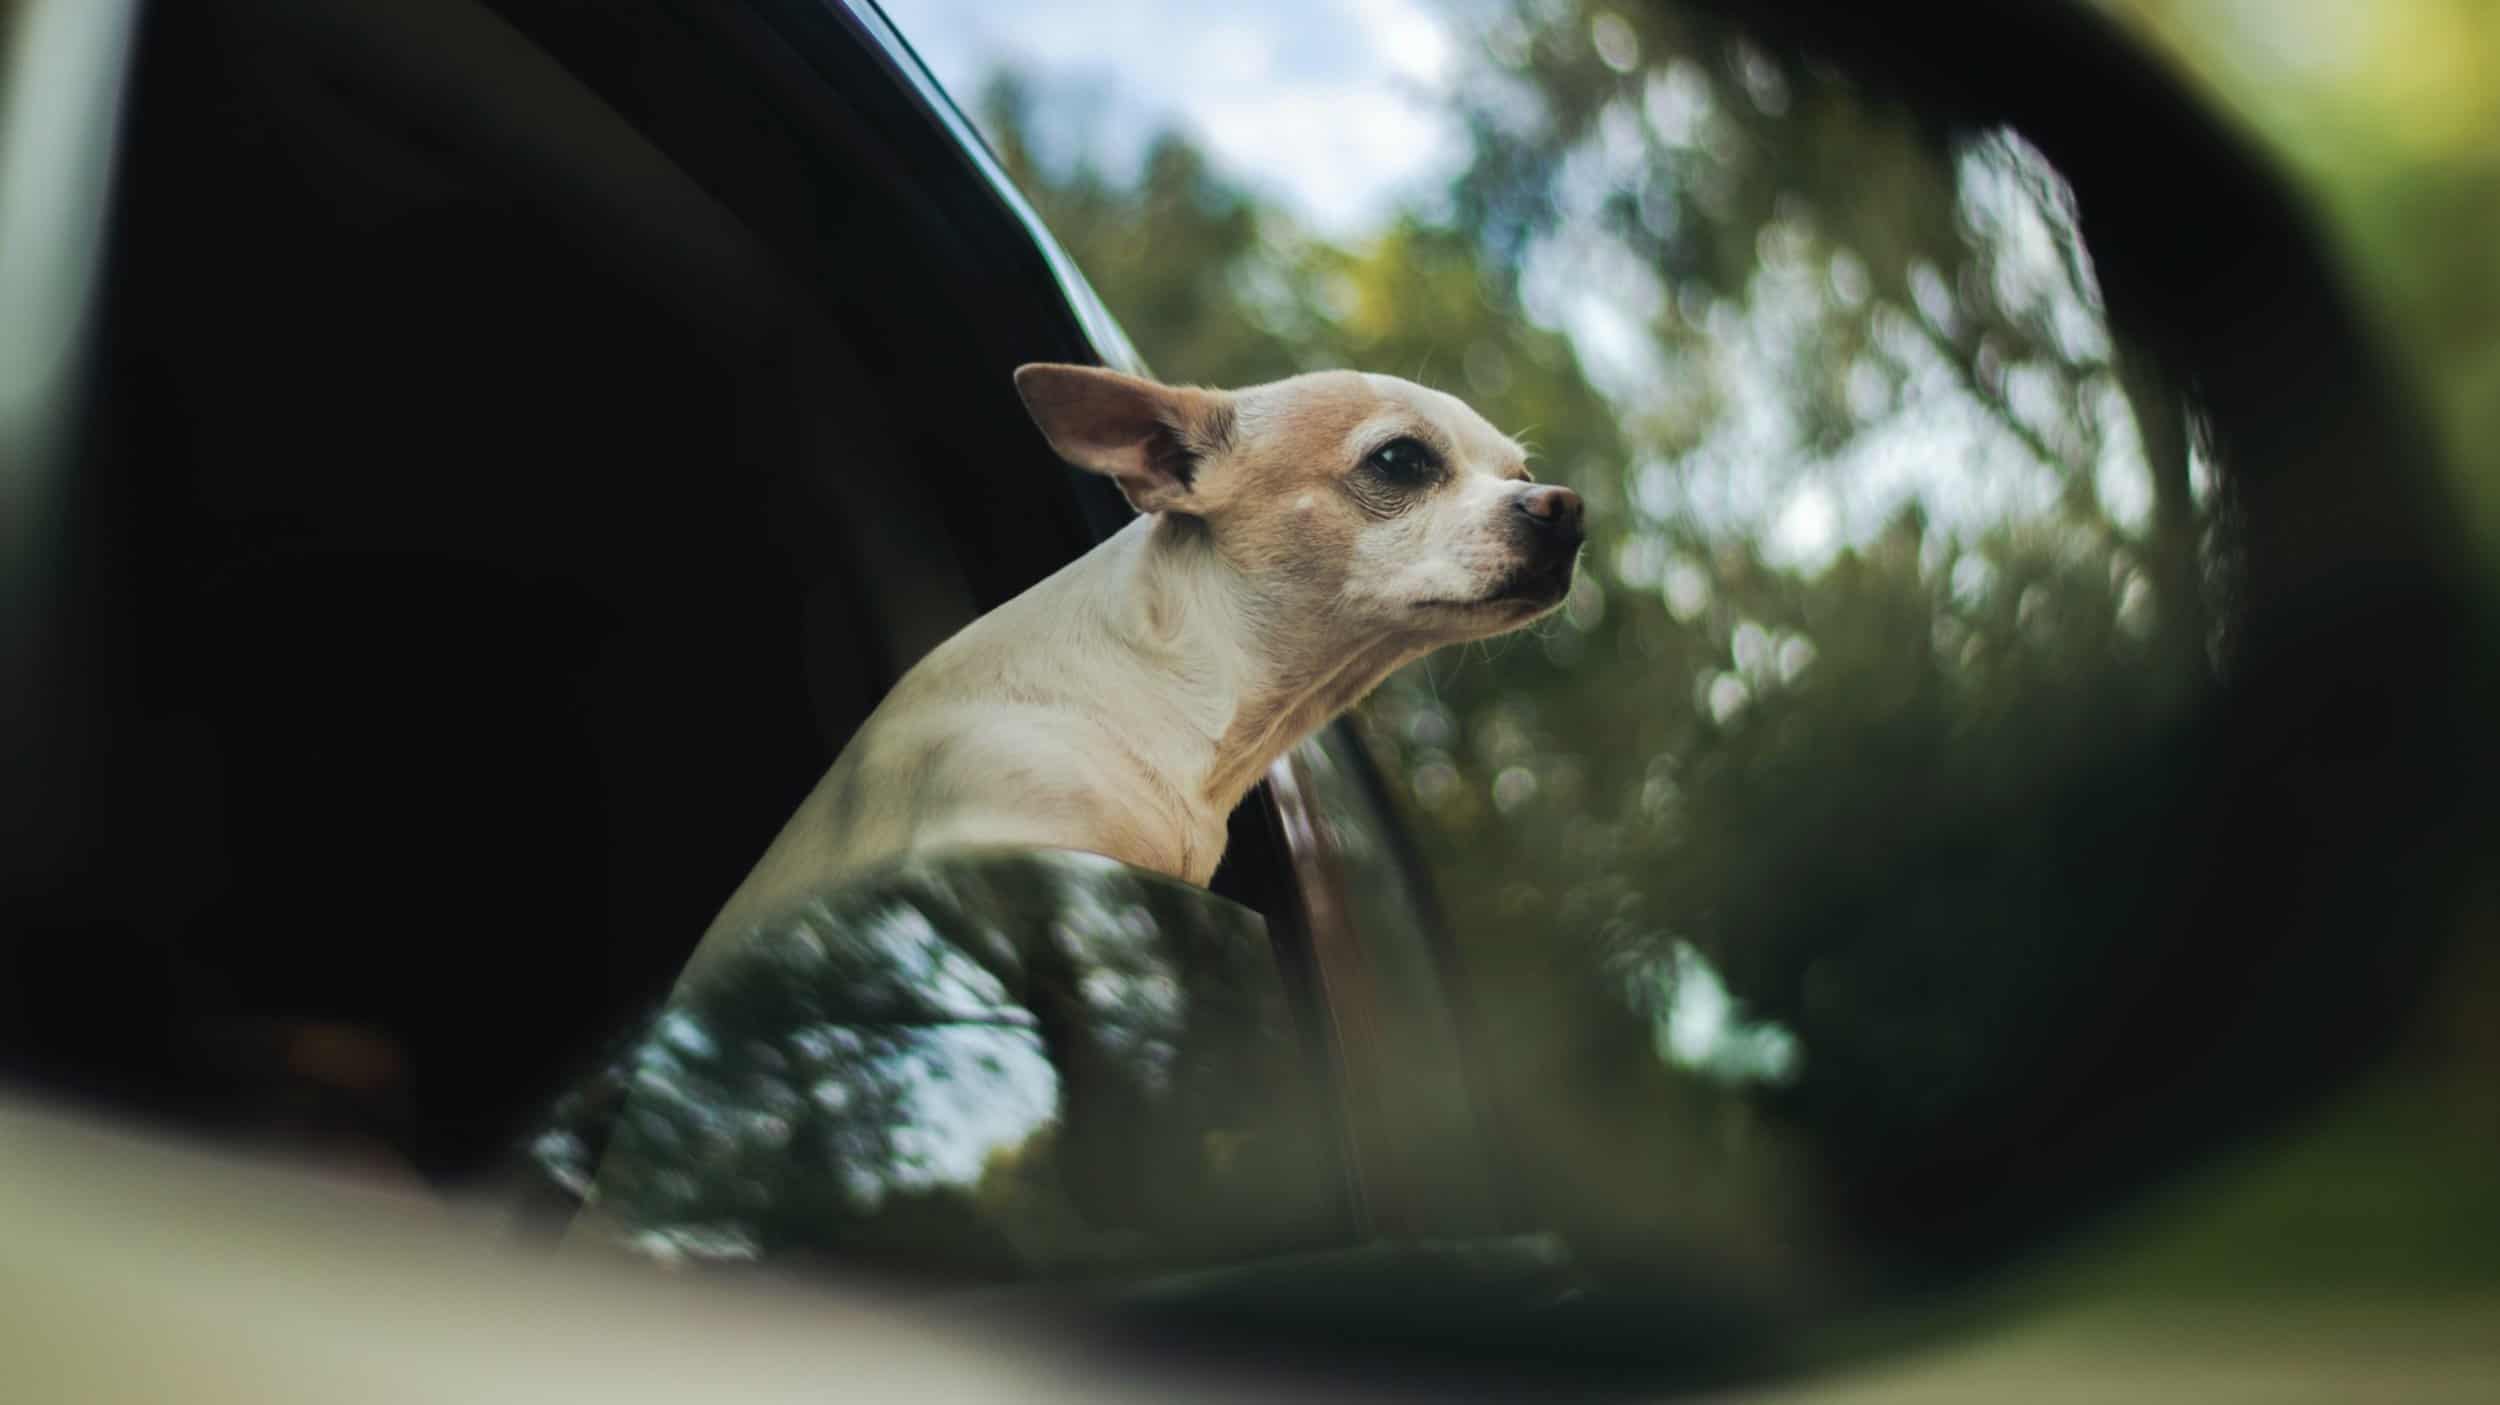 chihuahua reflection in car mirror